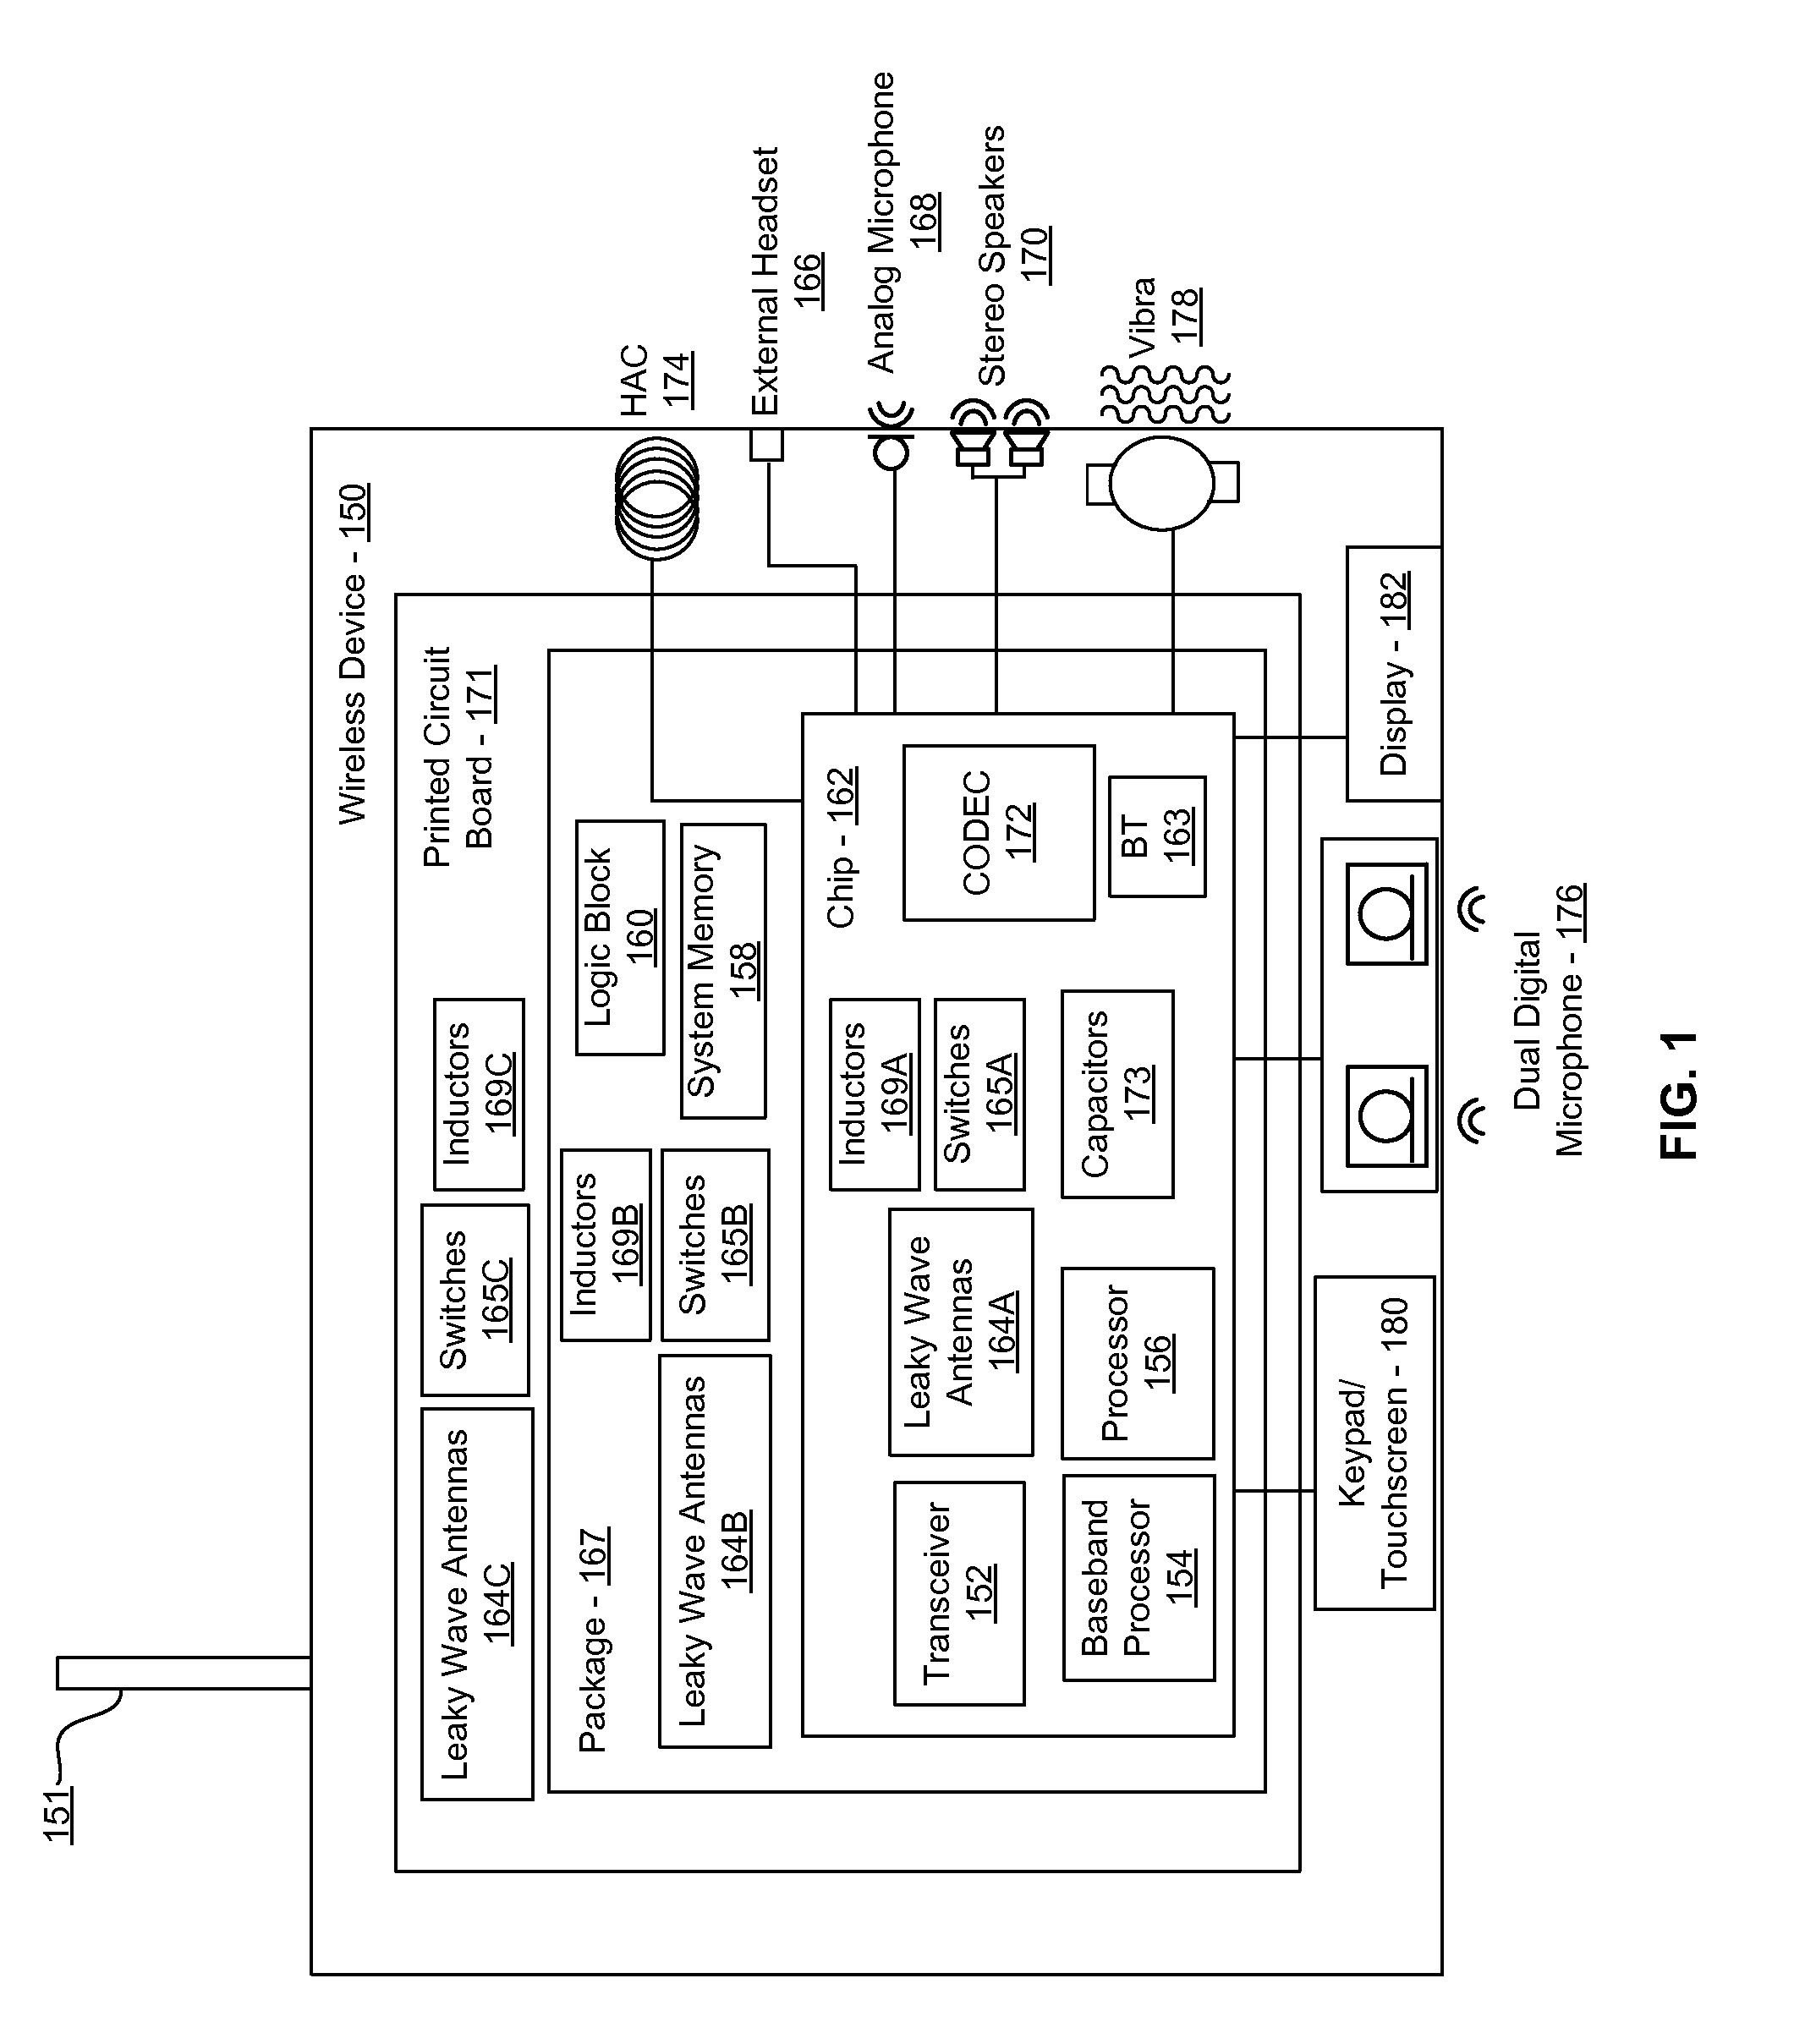 Method and system for dynamic control of output power of a leaky wave antenna